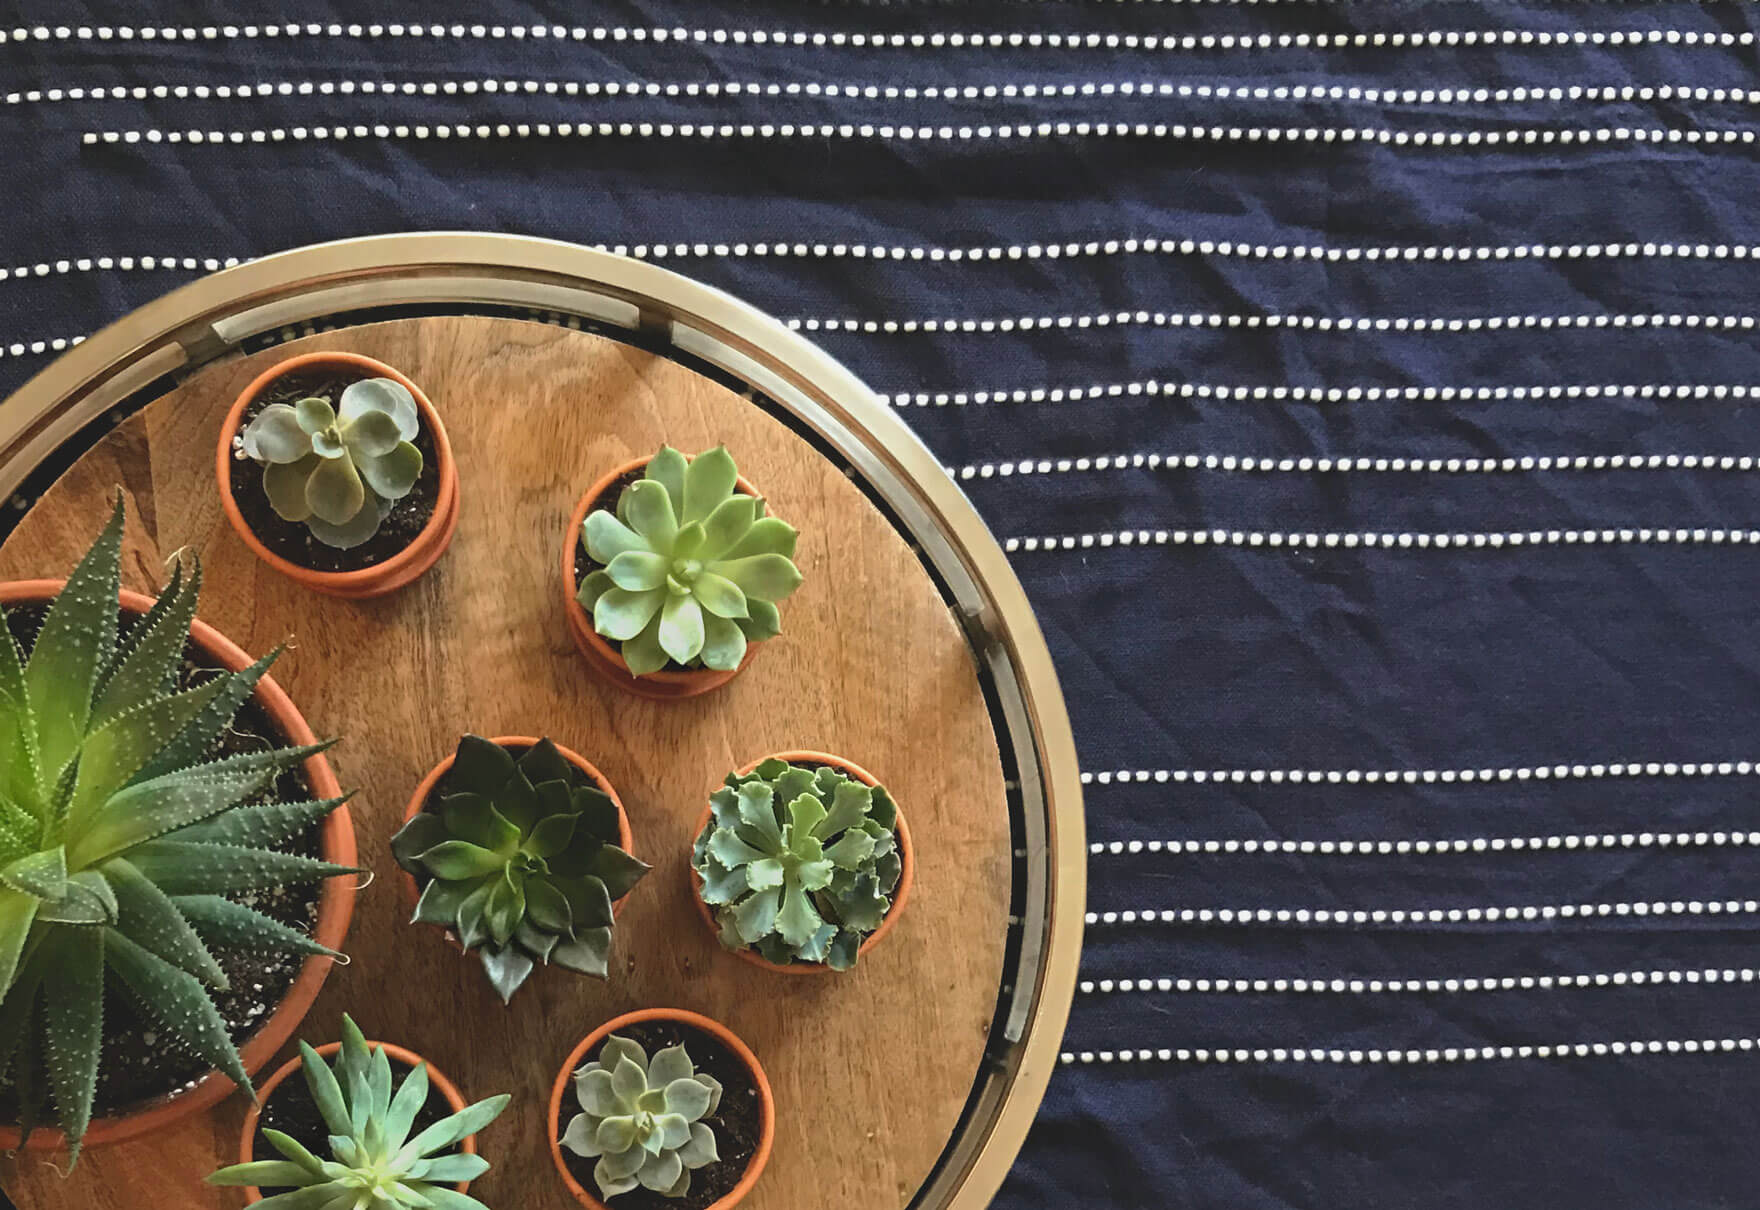 Plant Care Tips For Healthy Indoor Succulents | Bloomscape